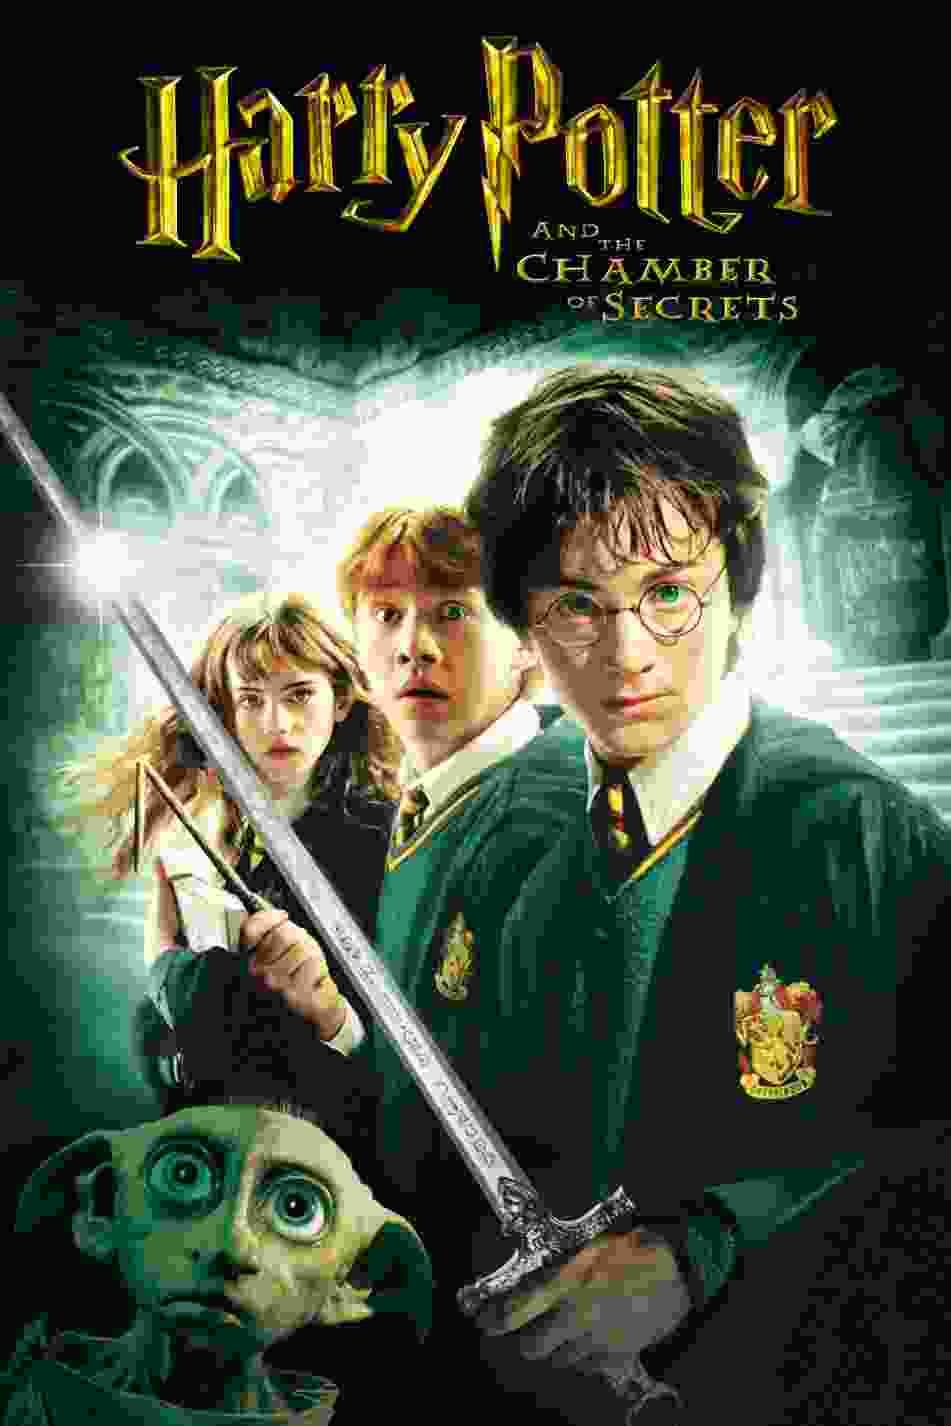 Harry Potter and the Chamber of Secrets (2002) Daniel Radcliffe